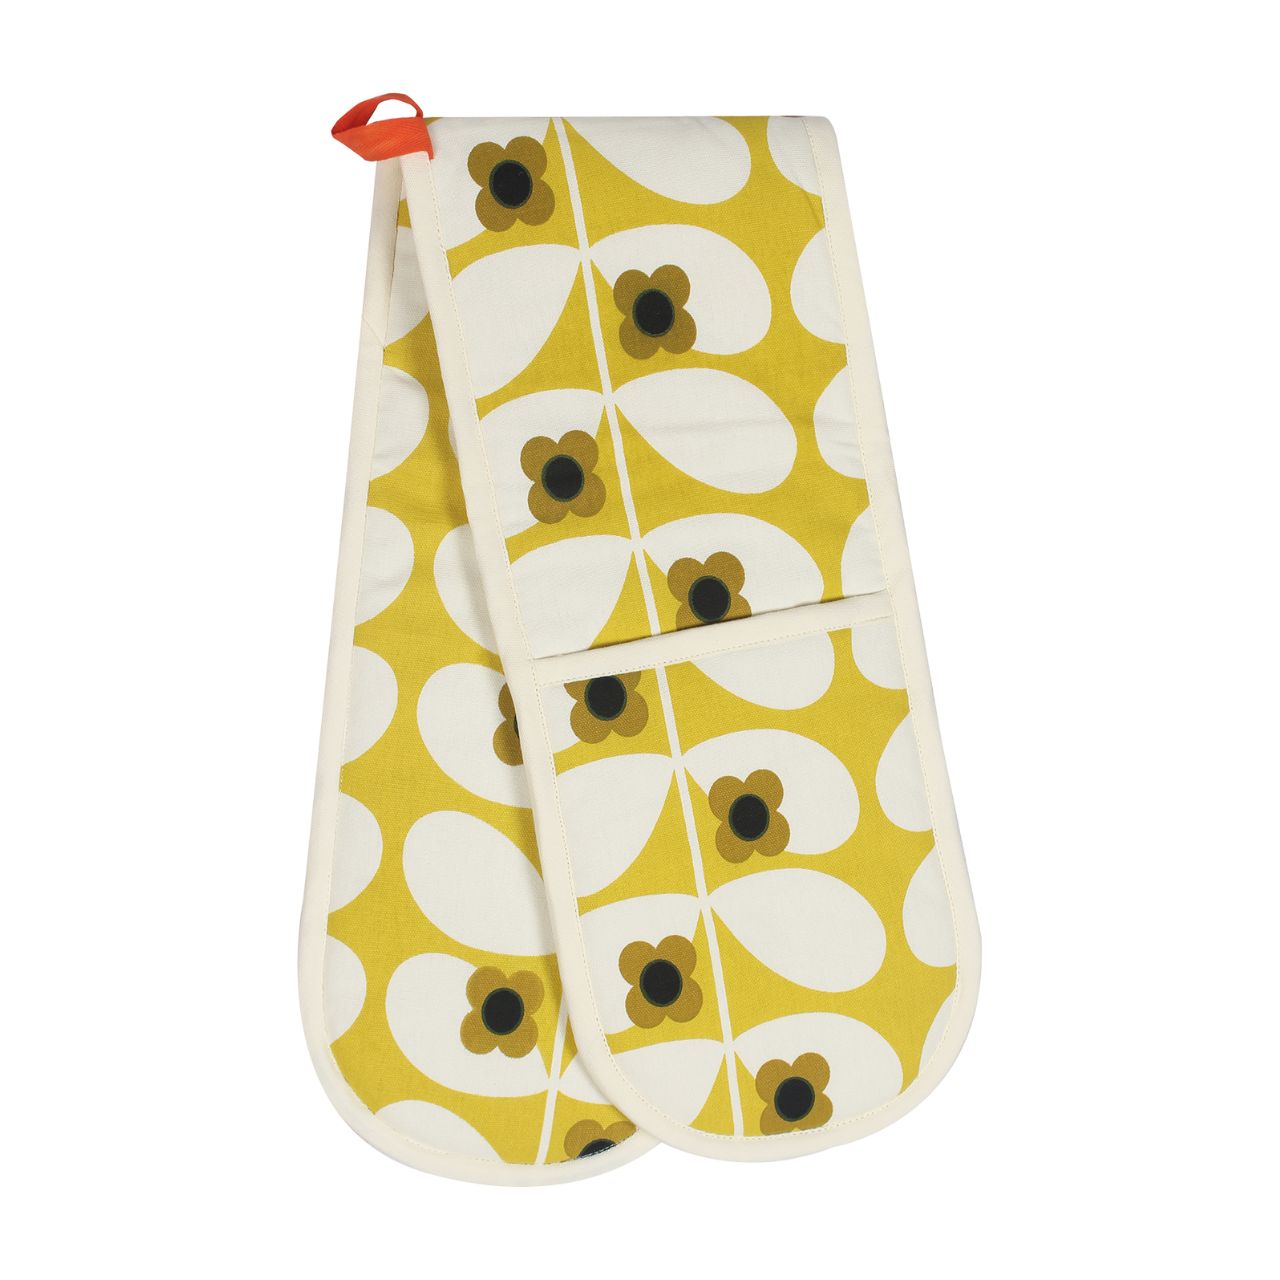 Tipperary Orla Kiely Double Oven Glove - Wild Rose Stem Ochre  An Orla Kiely designed double oven glove with a beautiful wild rose stem design in dandelion.  Keep your hands safe from burns and scalds in the kitchen with this beautiful stem print double oven glove. With a handy loop it can be easily hung to stop getting lost.